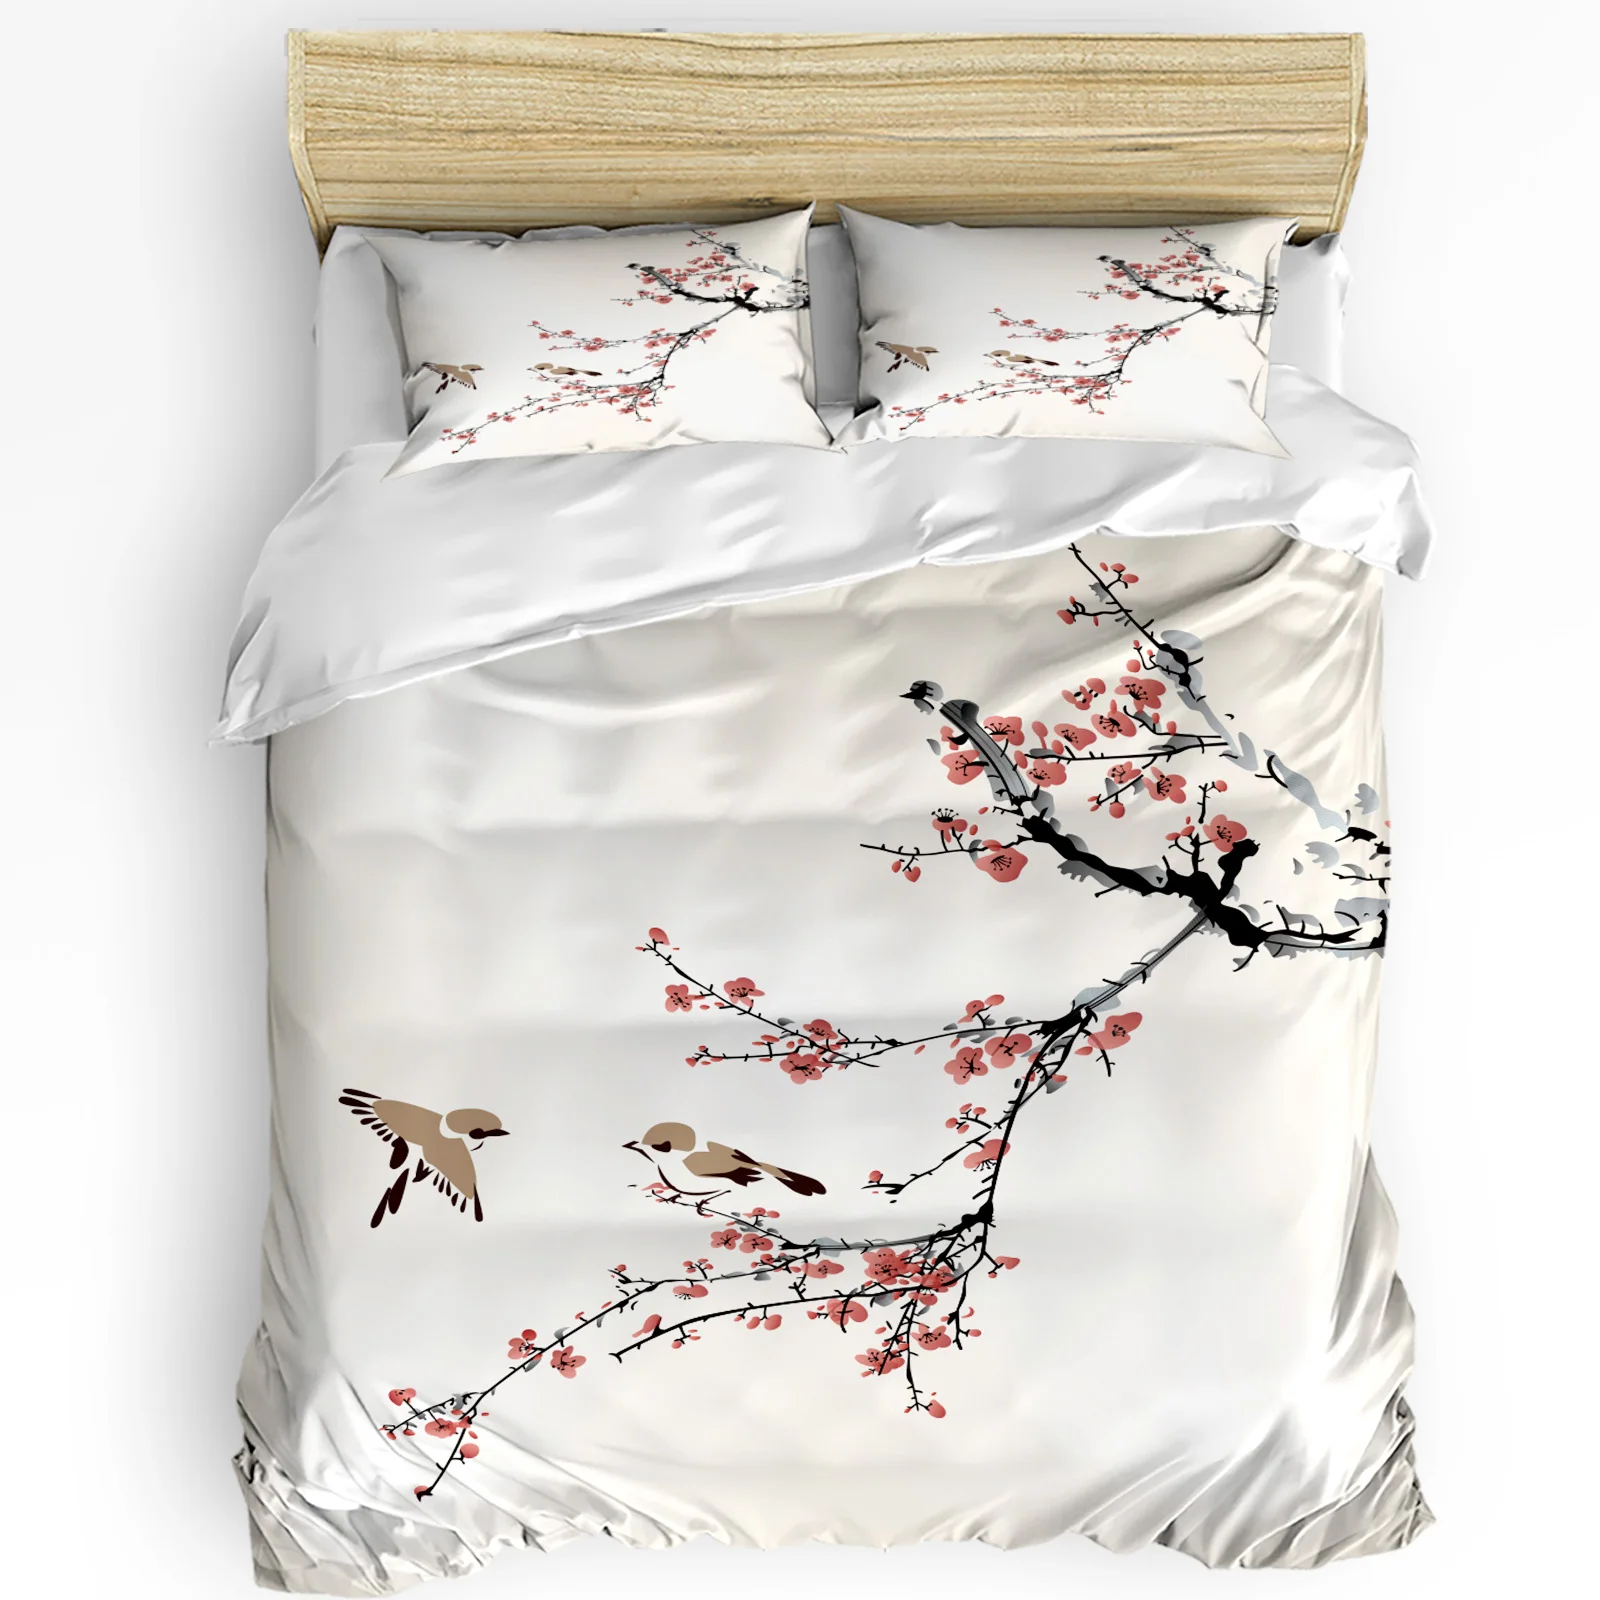 

Plum Blossom Bird Chinese Style Duvet Cover 3pcs Bedding Set Home Textile Quilt Cover Pillowcases Bedroom Bedding Set No Sheet